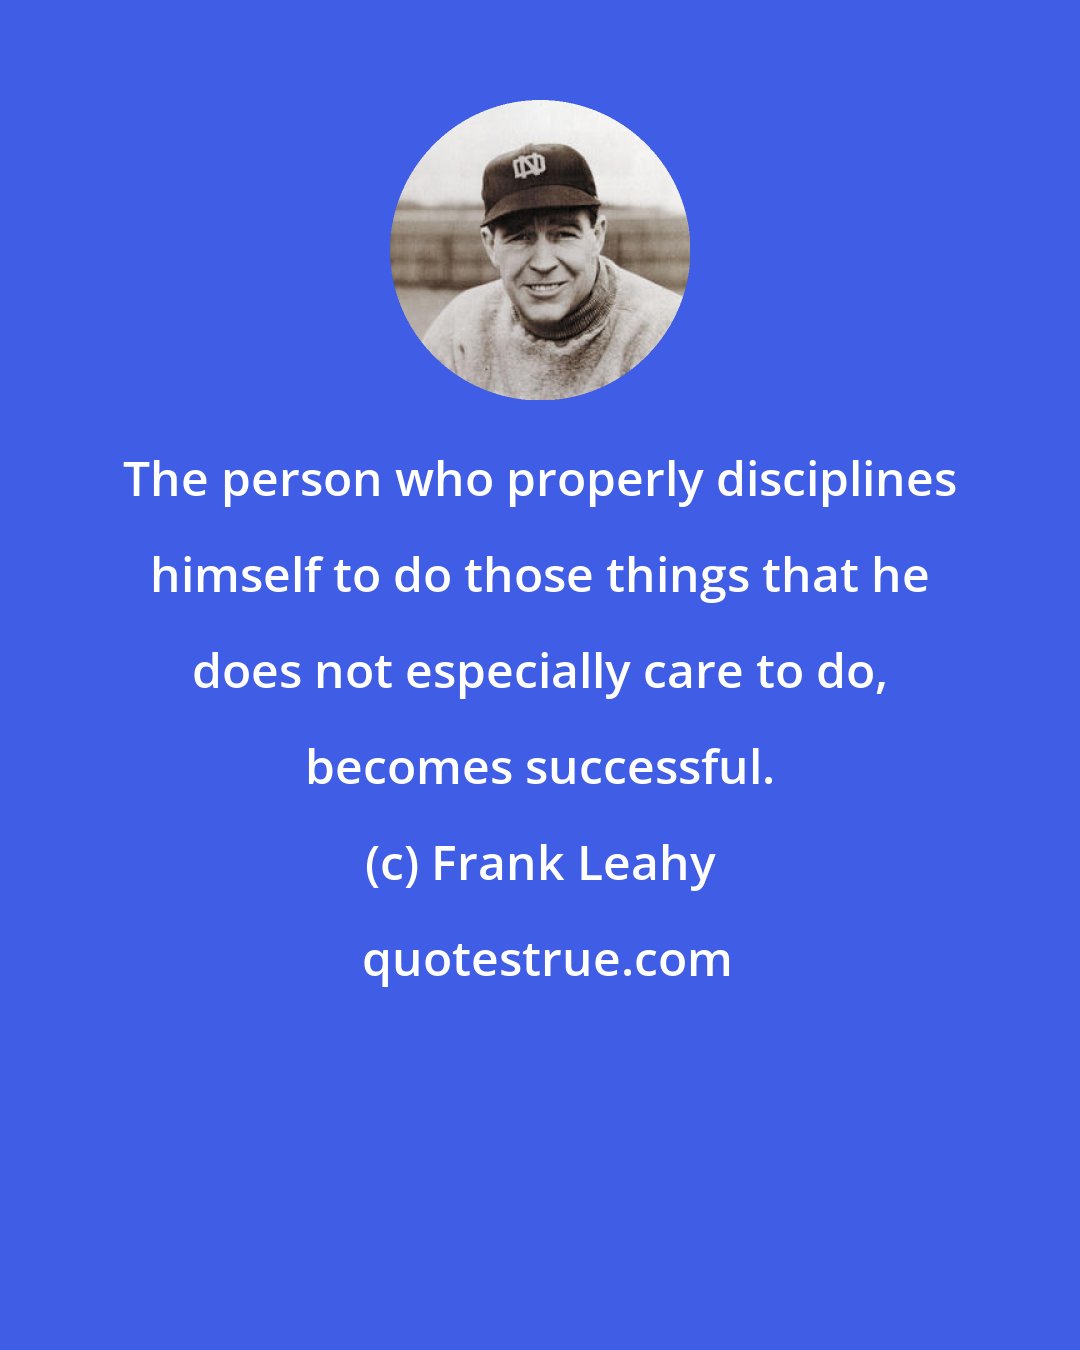 Frank Leahy: The person who properly disciplines himself to do those things that he does not especially care to do, becomes successful.